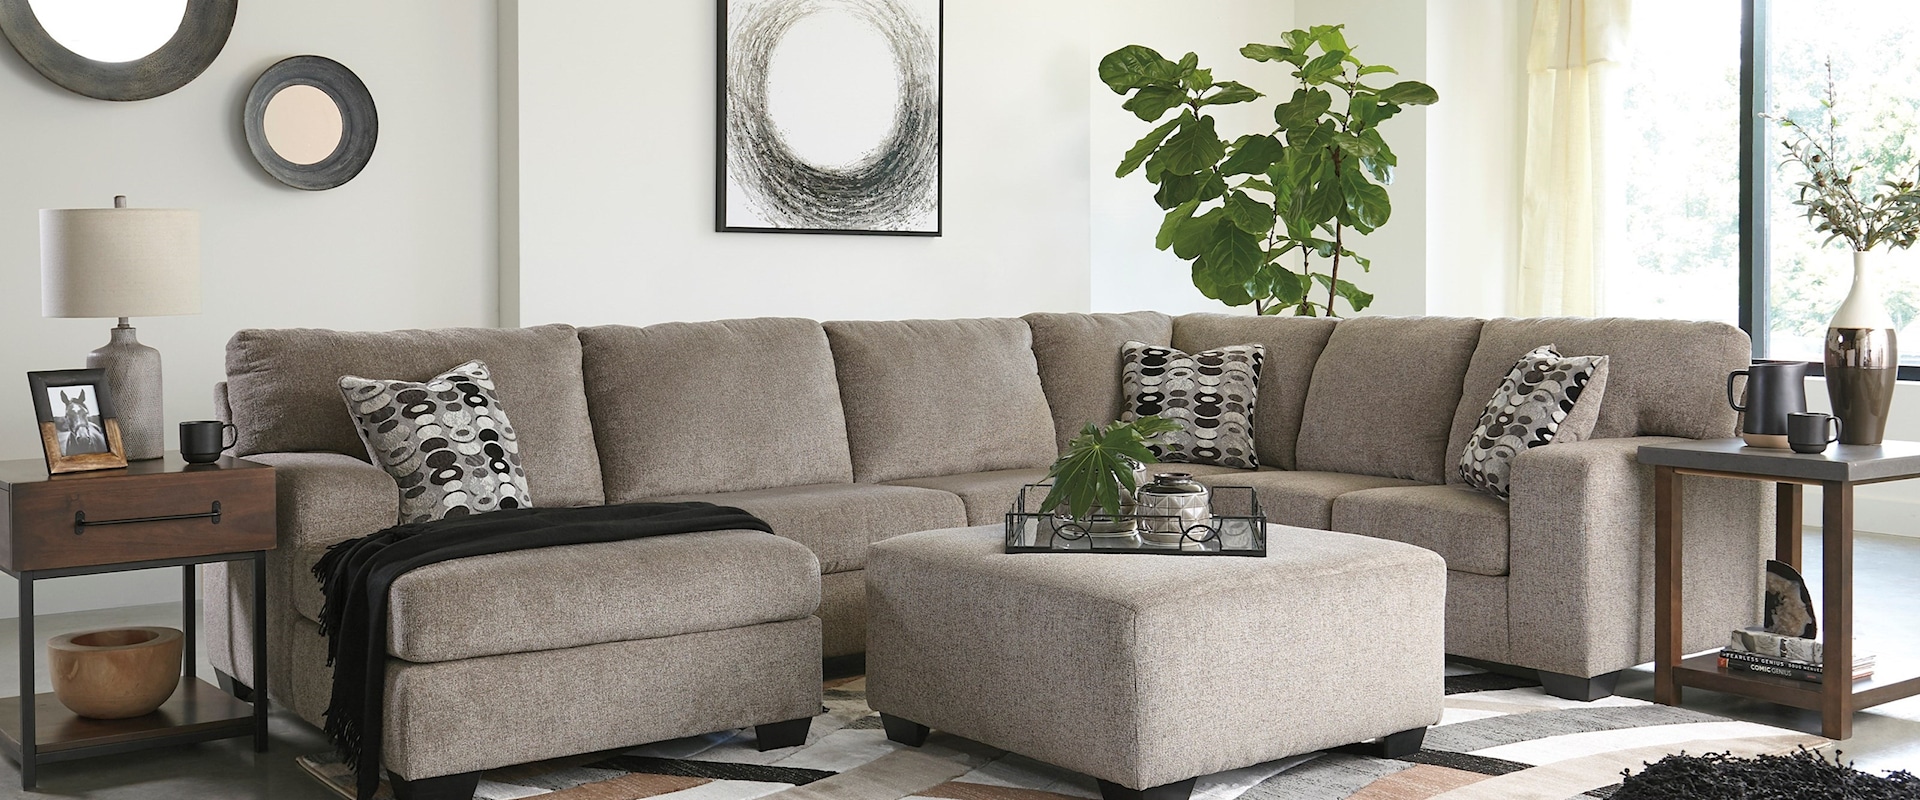 3pc Sectional and ottoman 